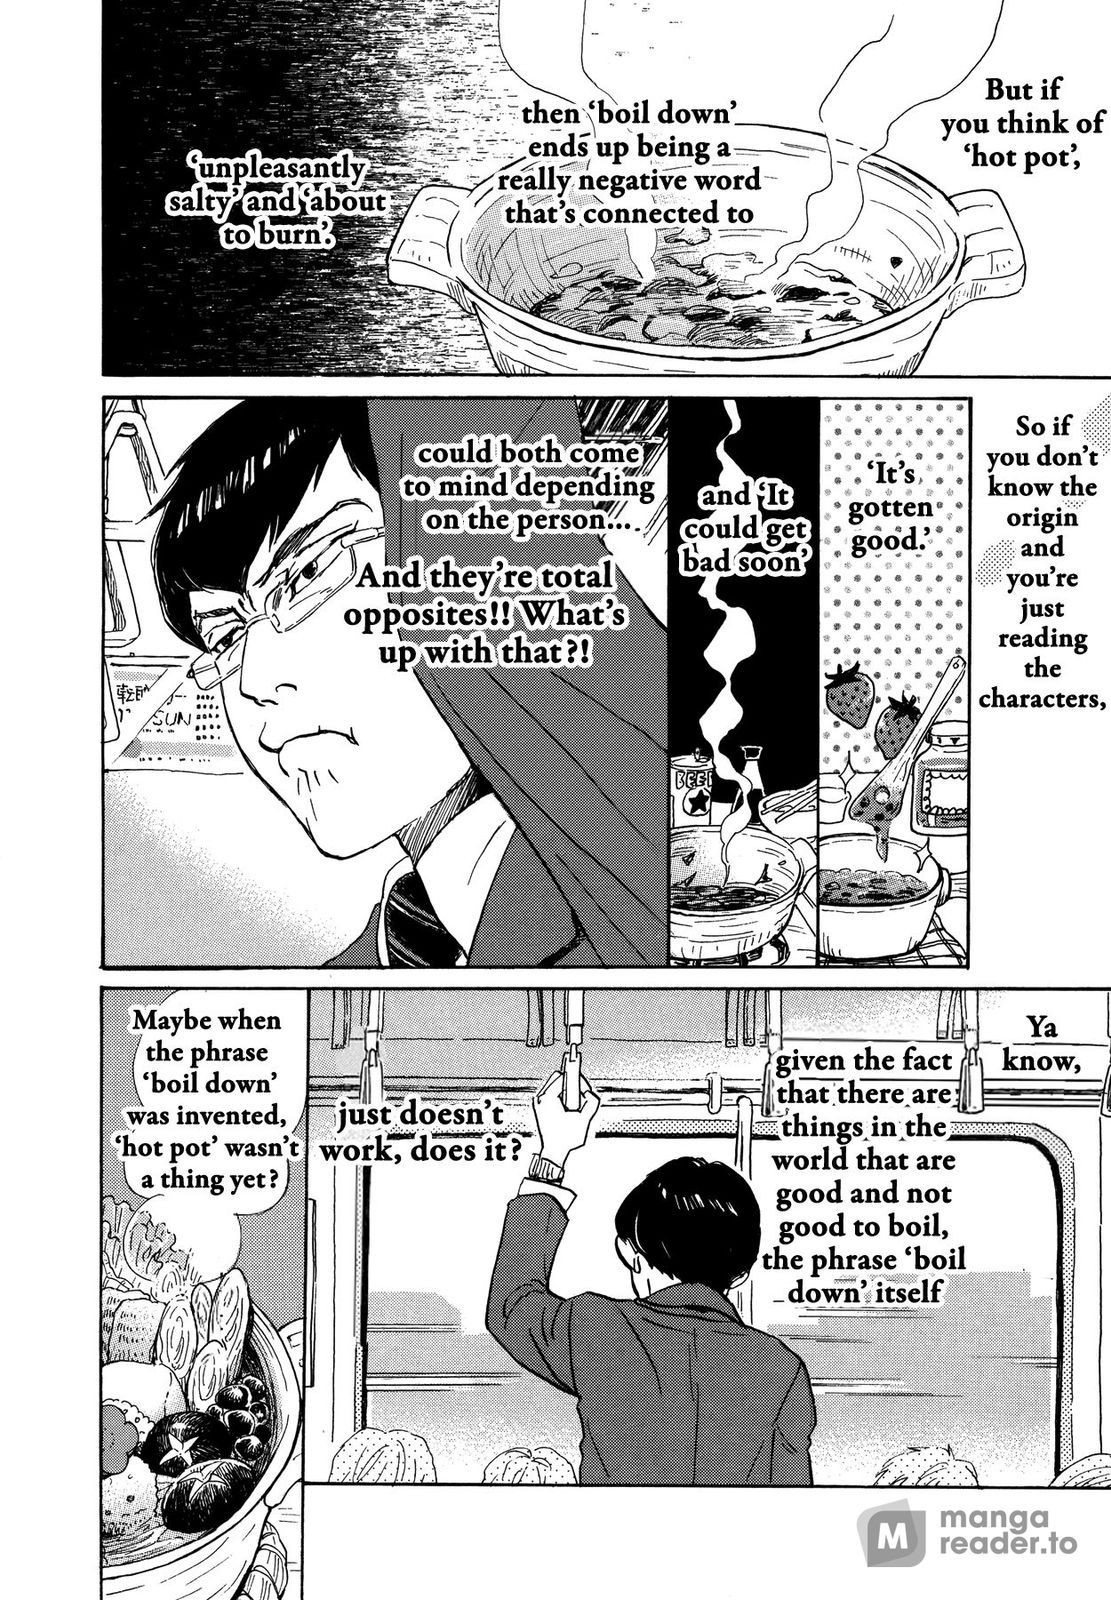 March Comes in Like a Lion, Chapter 156 Azusa Number 1 (Part 1) (EN) image 04